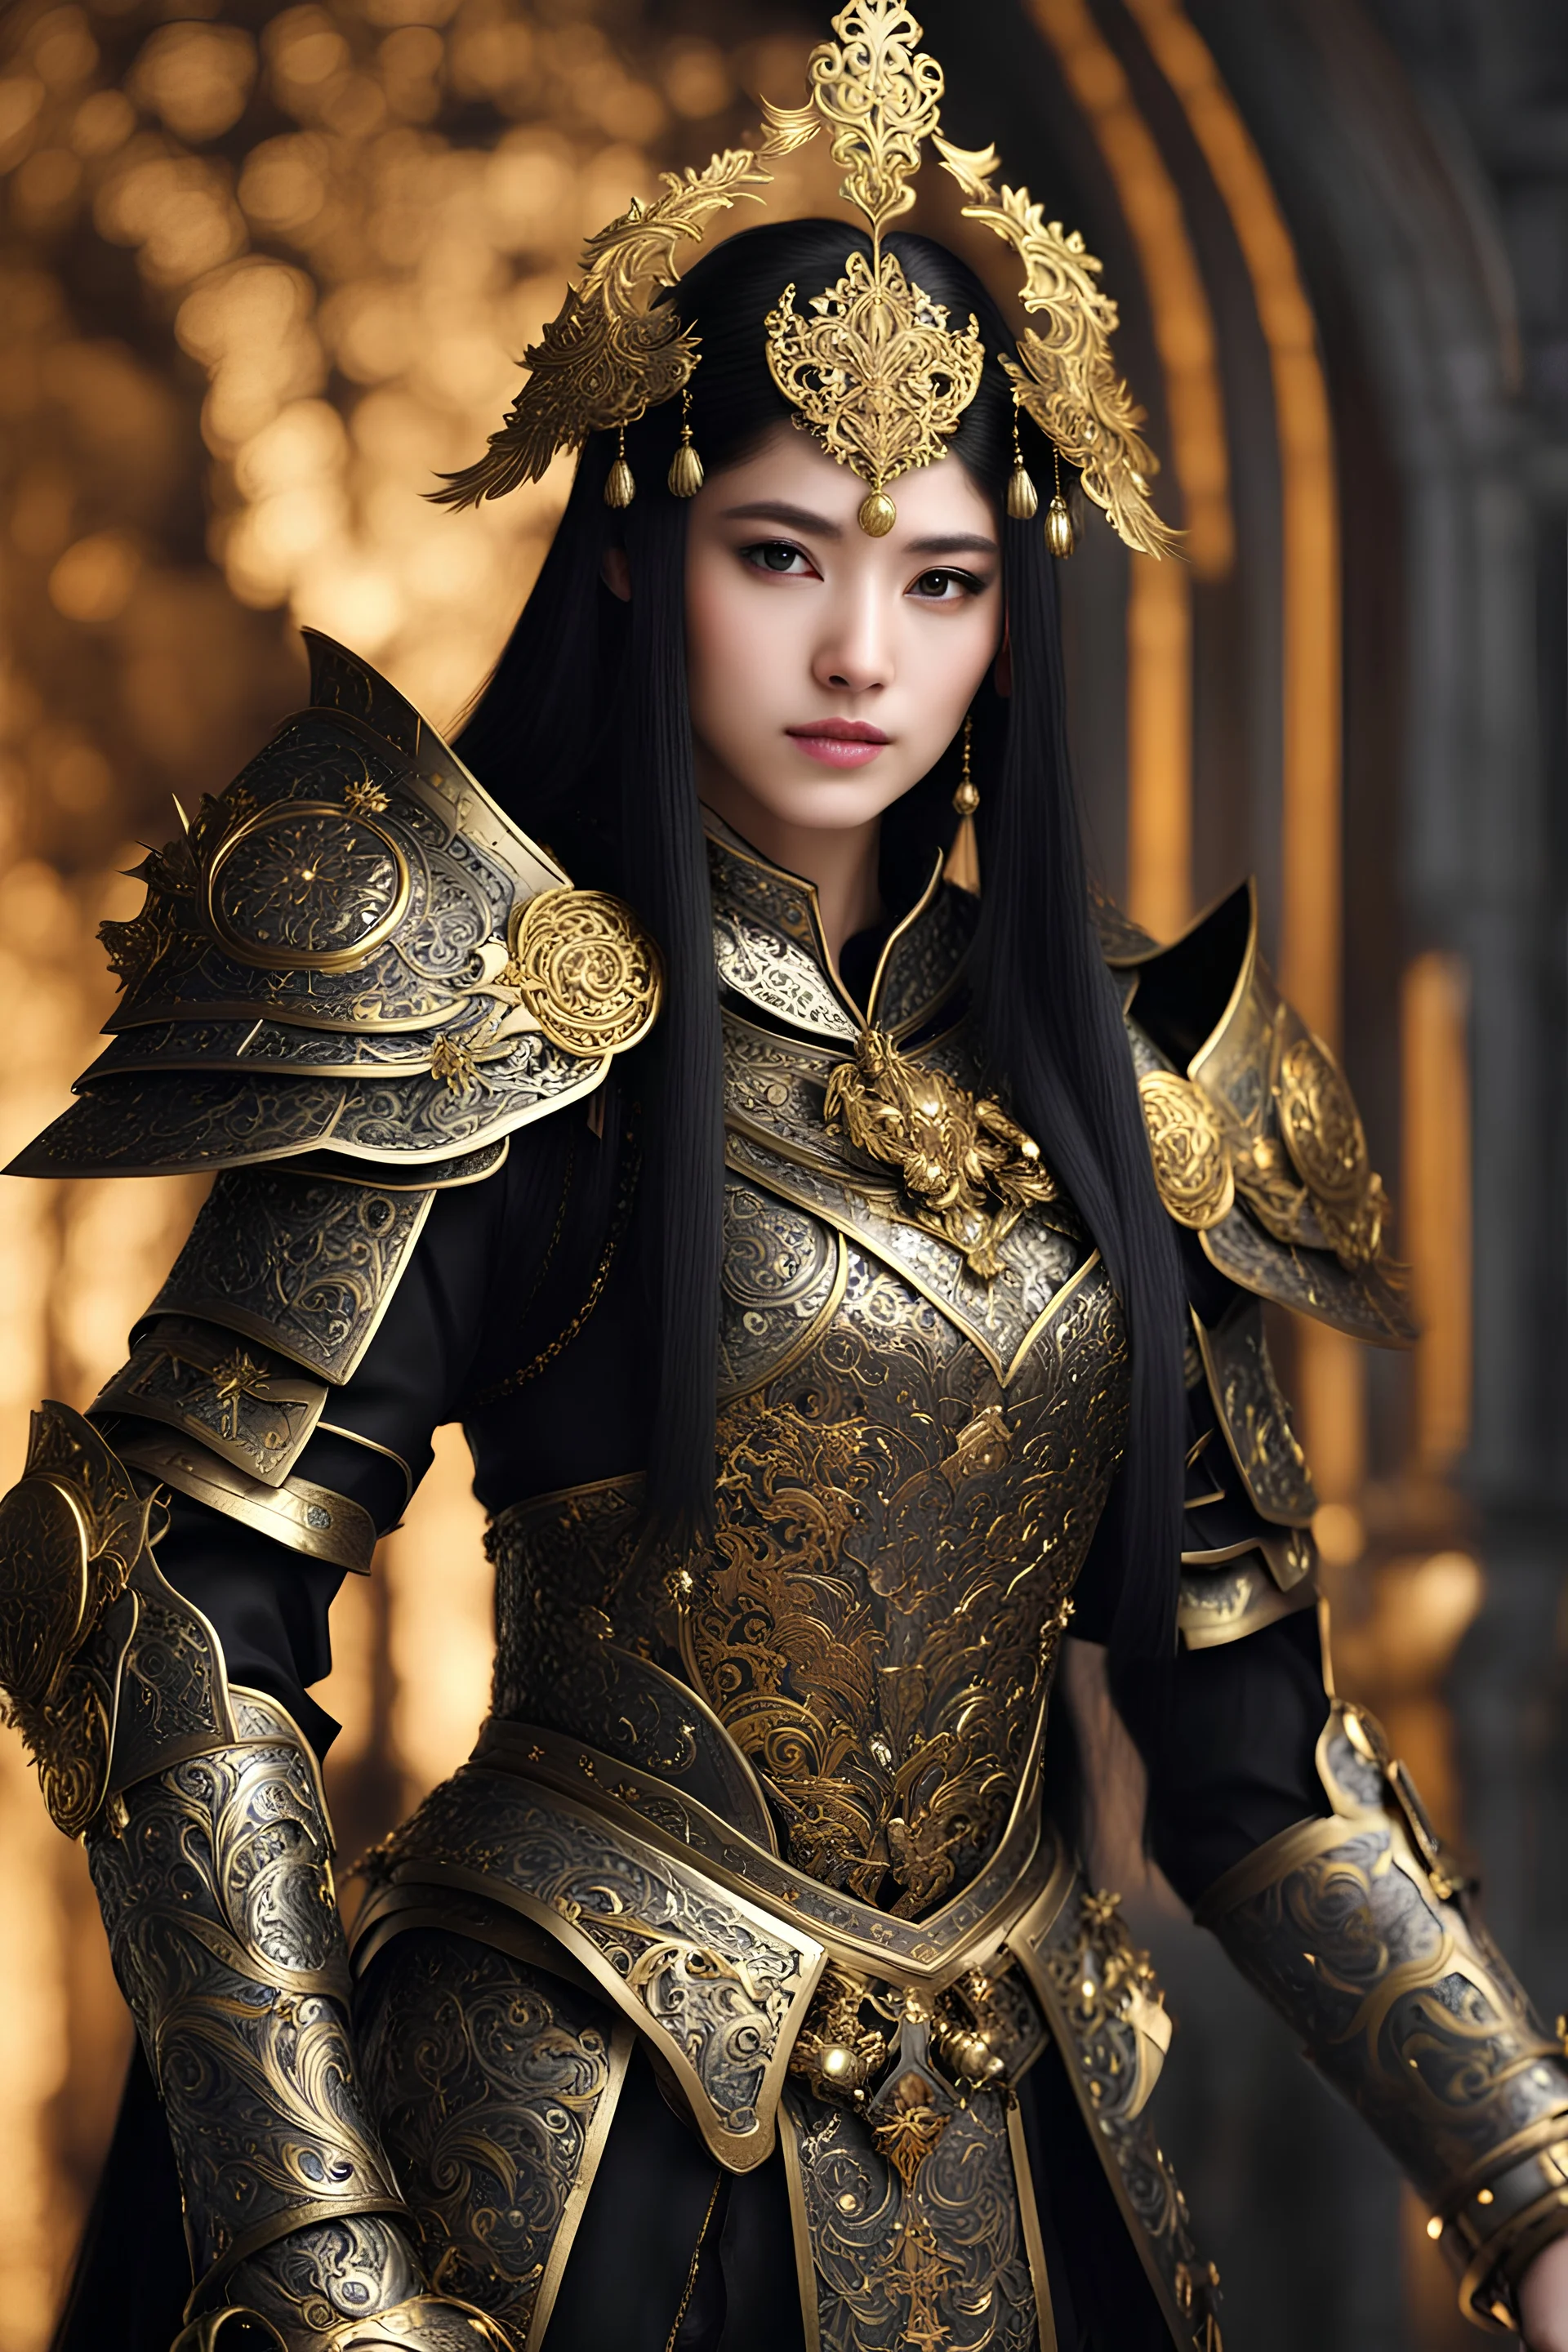 Realistic photography,front_view, (1King, looking at viewer), black long hair,traditional dress ornaments mechanical_armor, intricate armor, delicate golden filigree, intricate filigree, black metalic parts, detailed part, dynamic pose, abstrac background, dynamic lighting